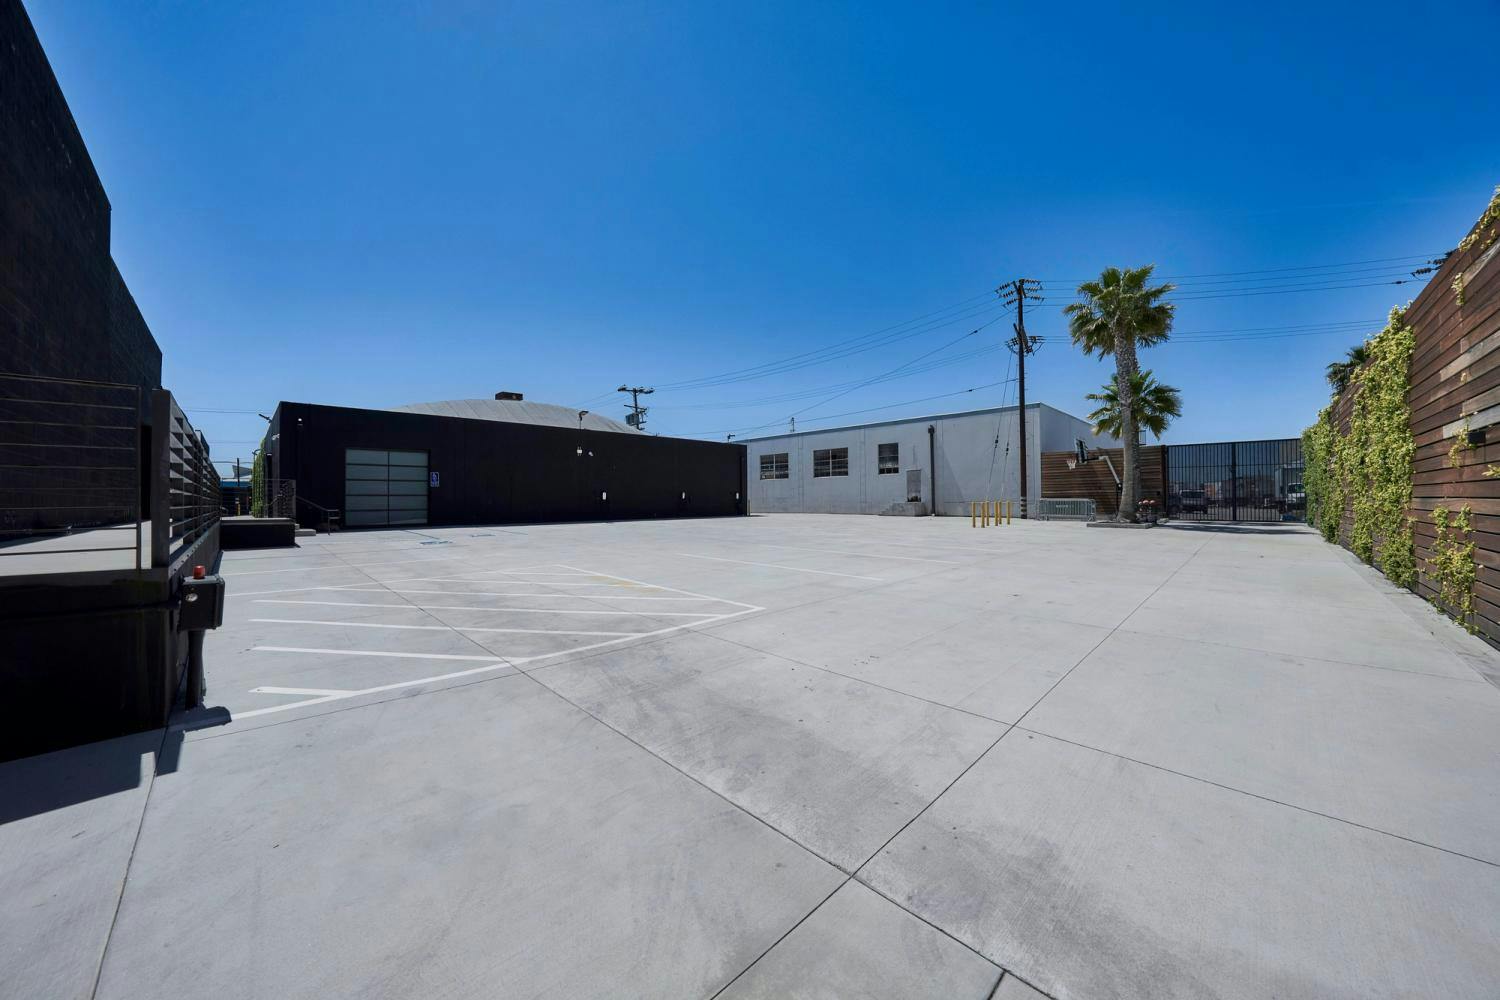 Perspective of a large black warehouse building with minimalistic design, featuring a clear and empty concrete parking lot.